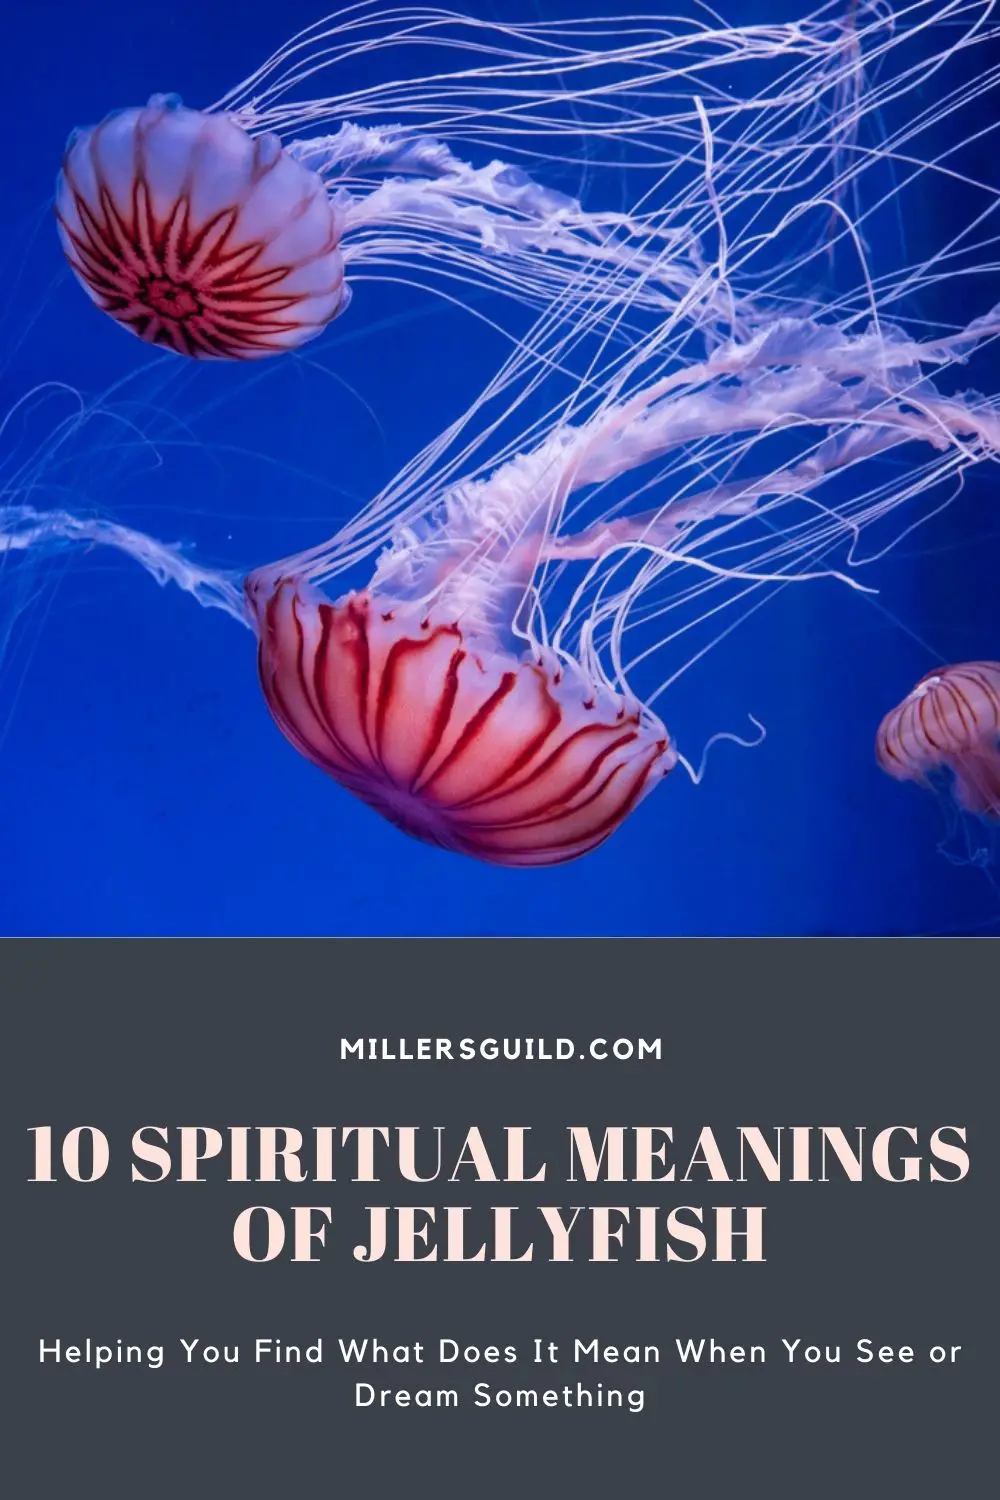 Jellyfish In Dreams: Spiritual Meaning